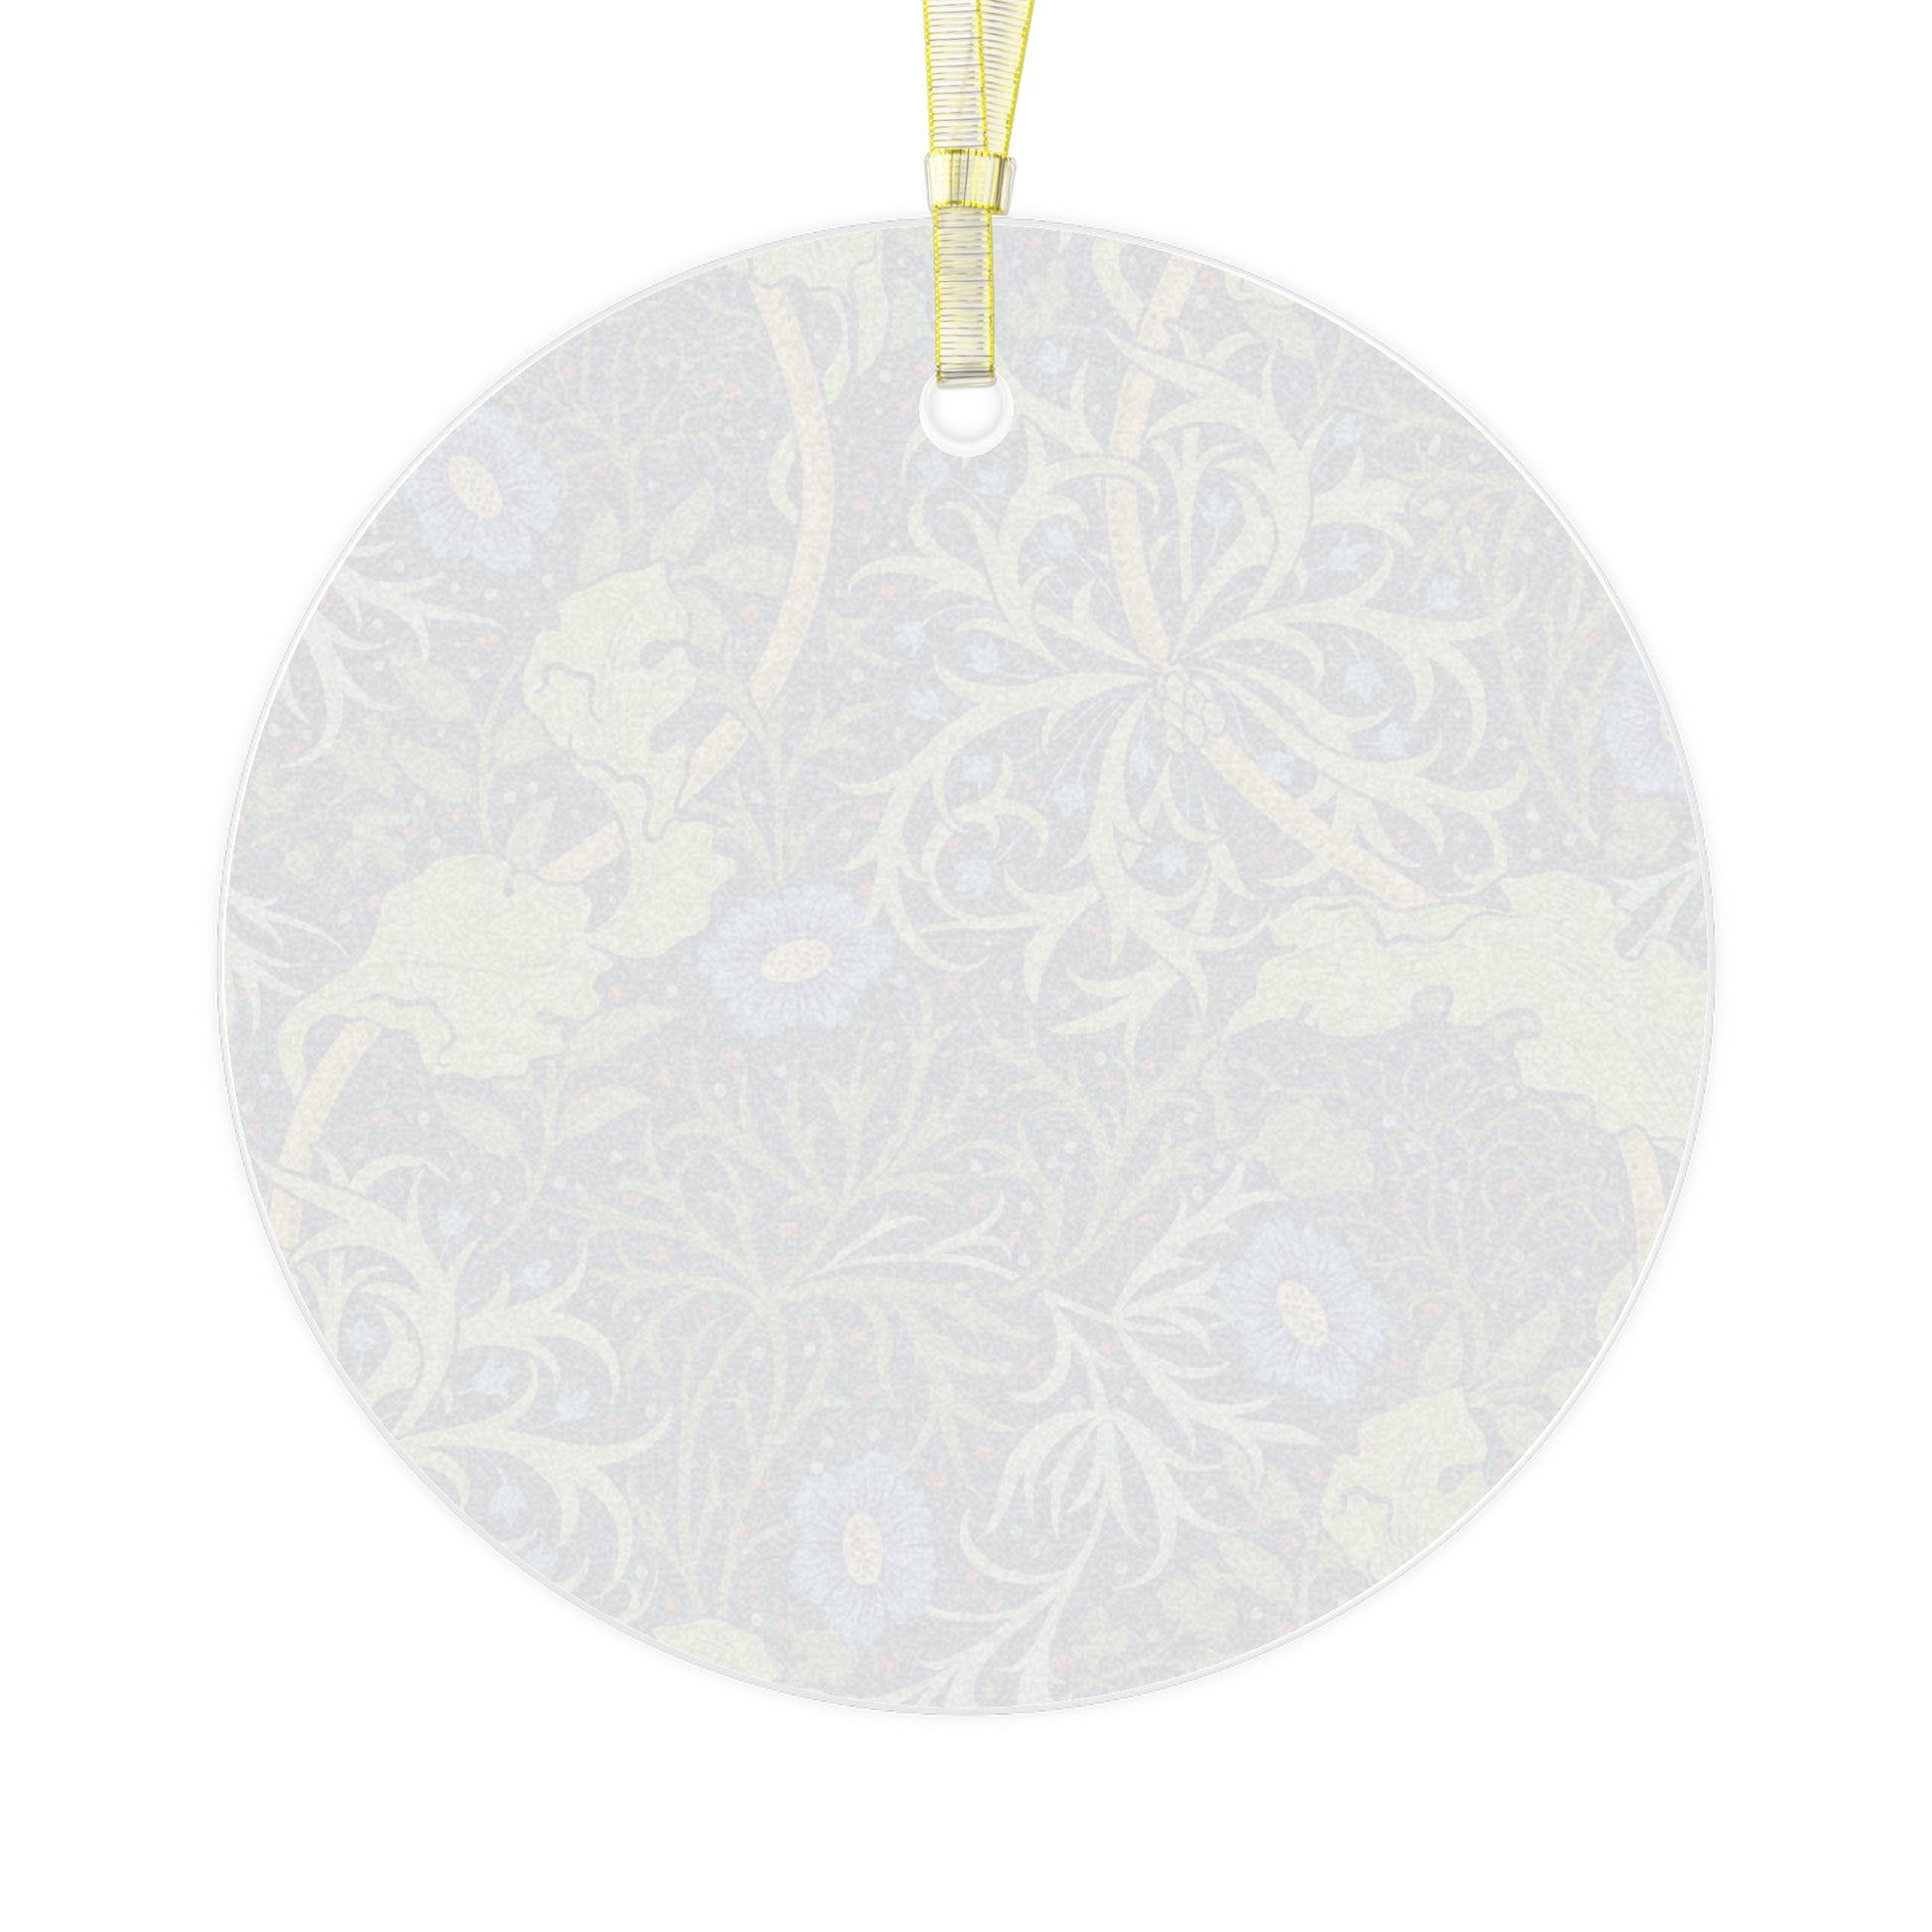 william-morris-co-christmas-heirloom-glass-ornament-seaweed-collection-blue-flowers-3